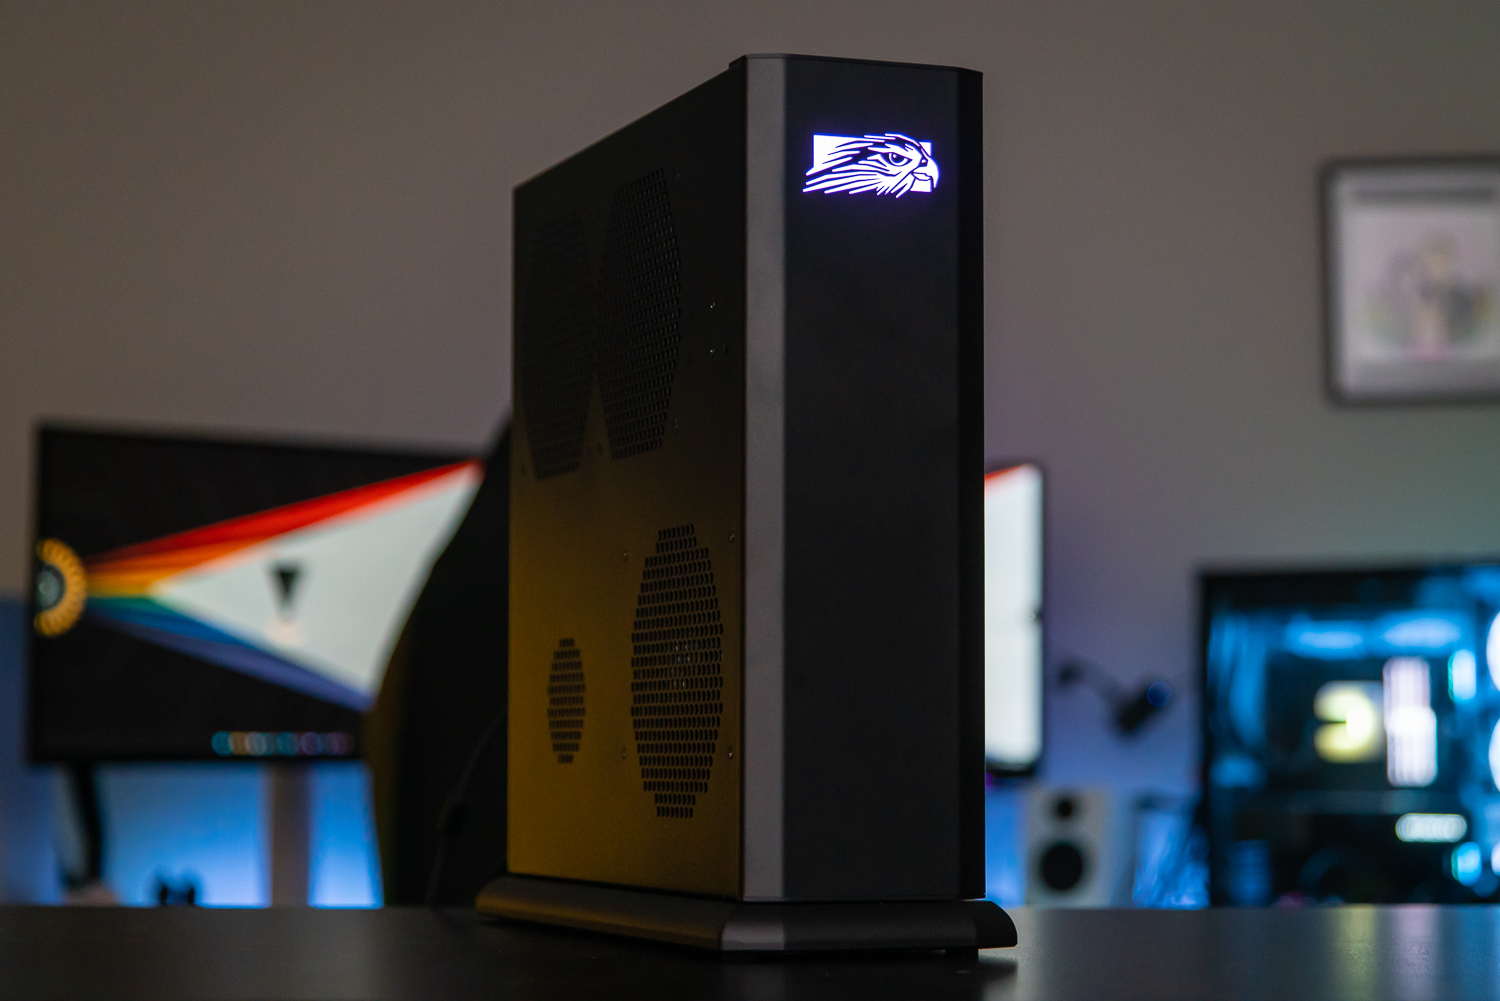 Origin PC Big O V3: PlayStation 5, Xbox Series X, Nintendo Switch OLED, RTX  3090, and Ryzen 9 5950X all integrated into one ultimate gaming machine -   News